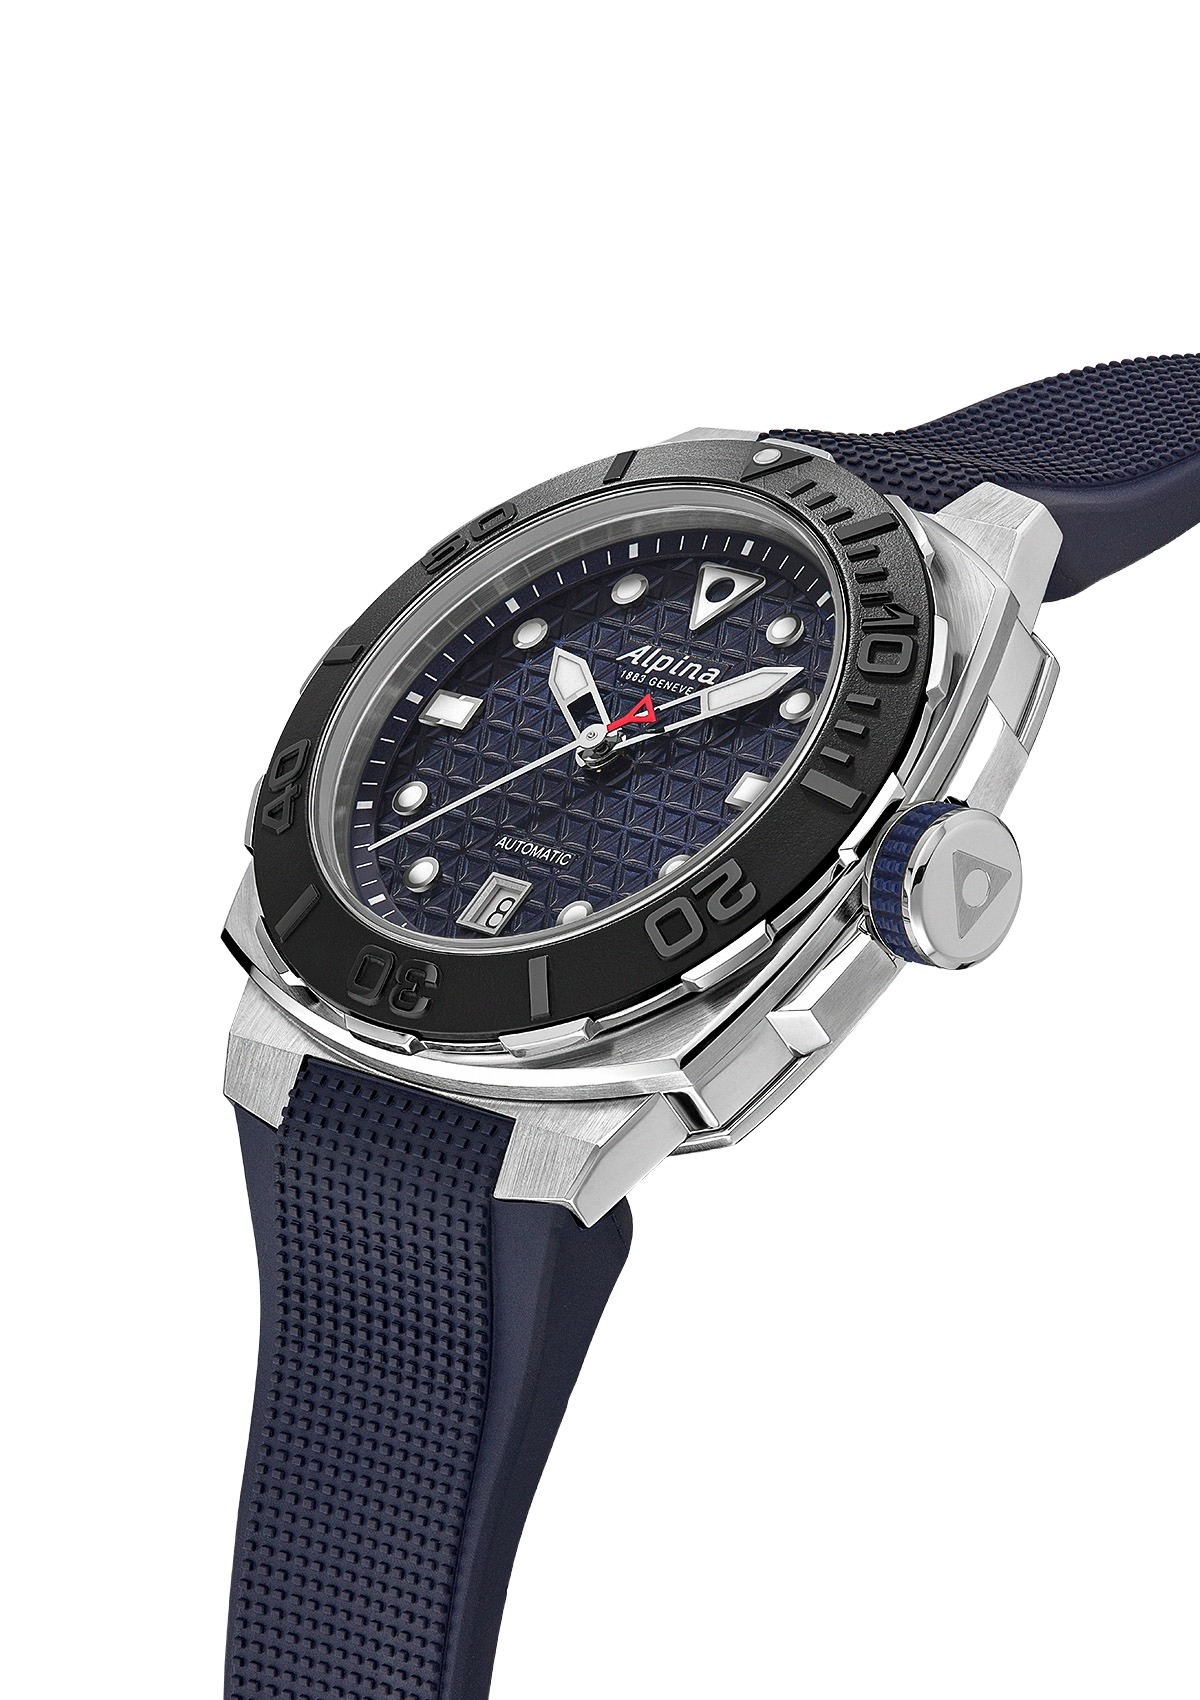 Alpina - Seastrong Extreme Automatic